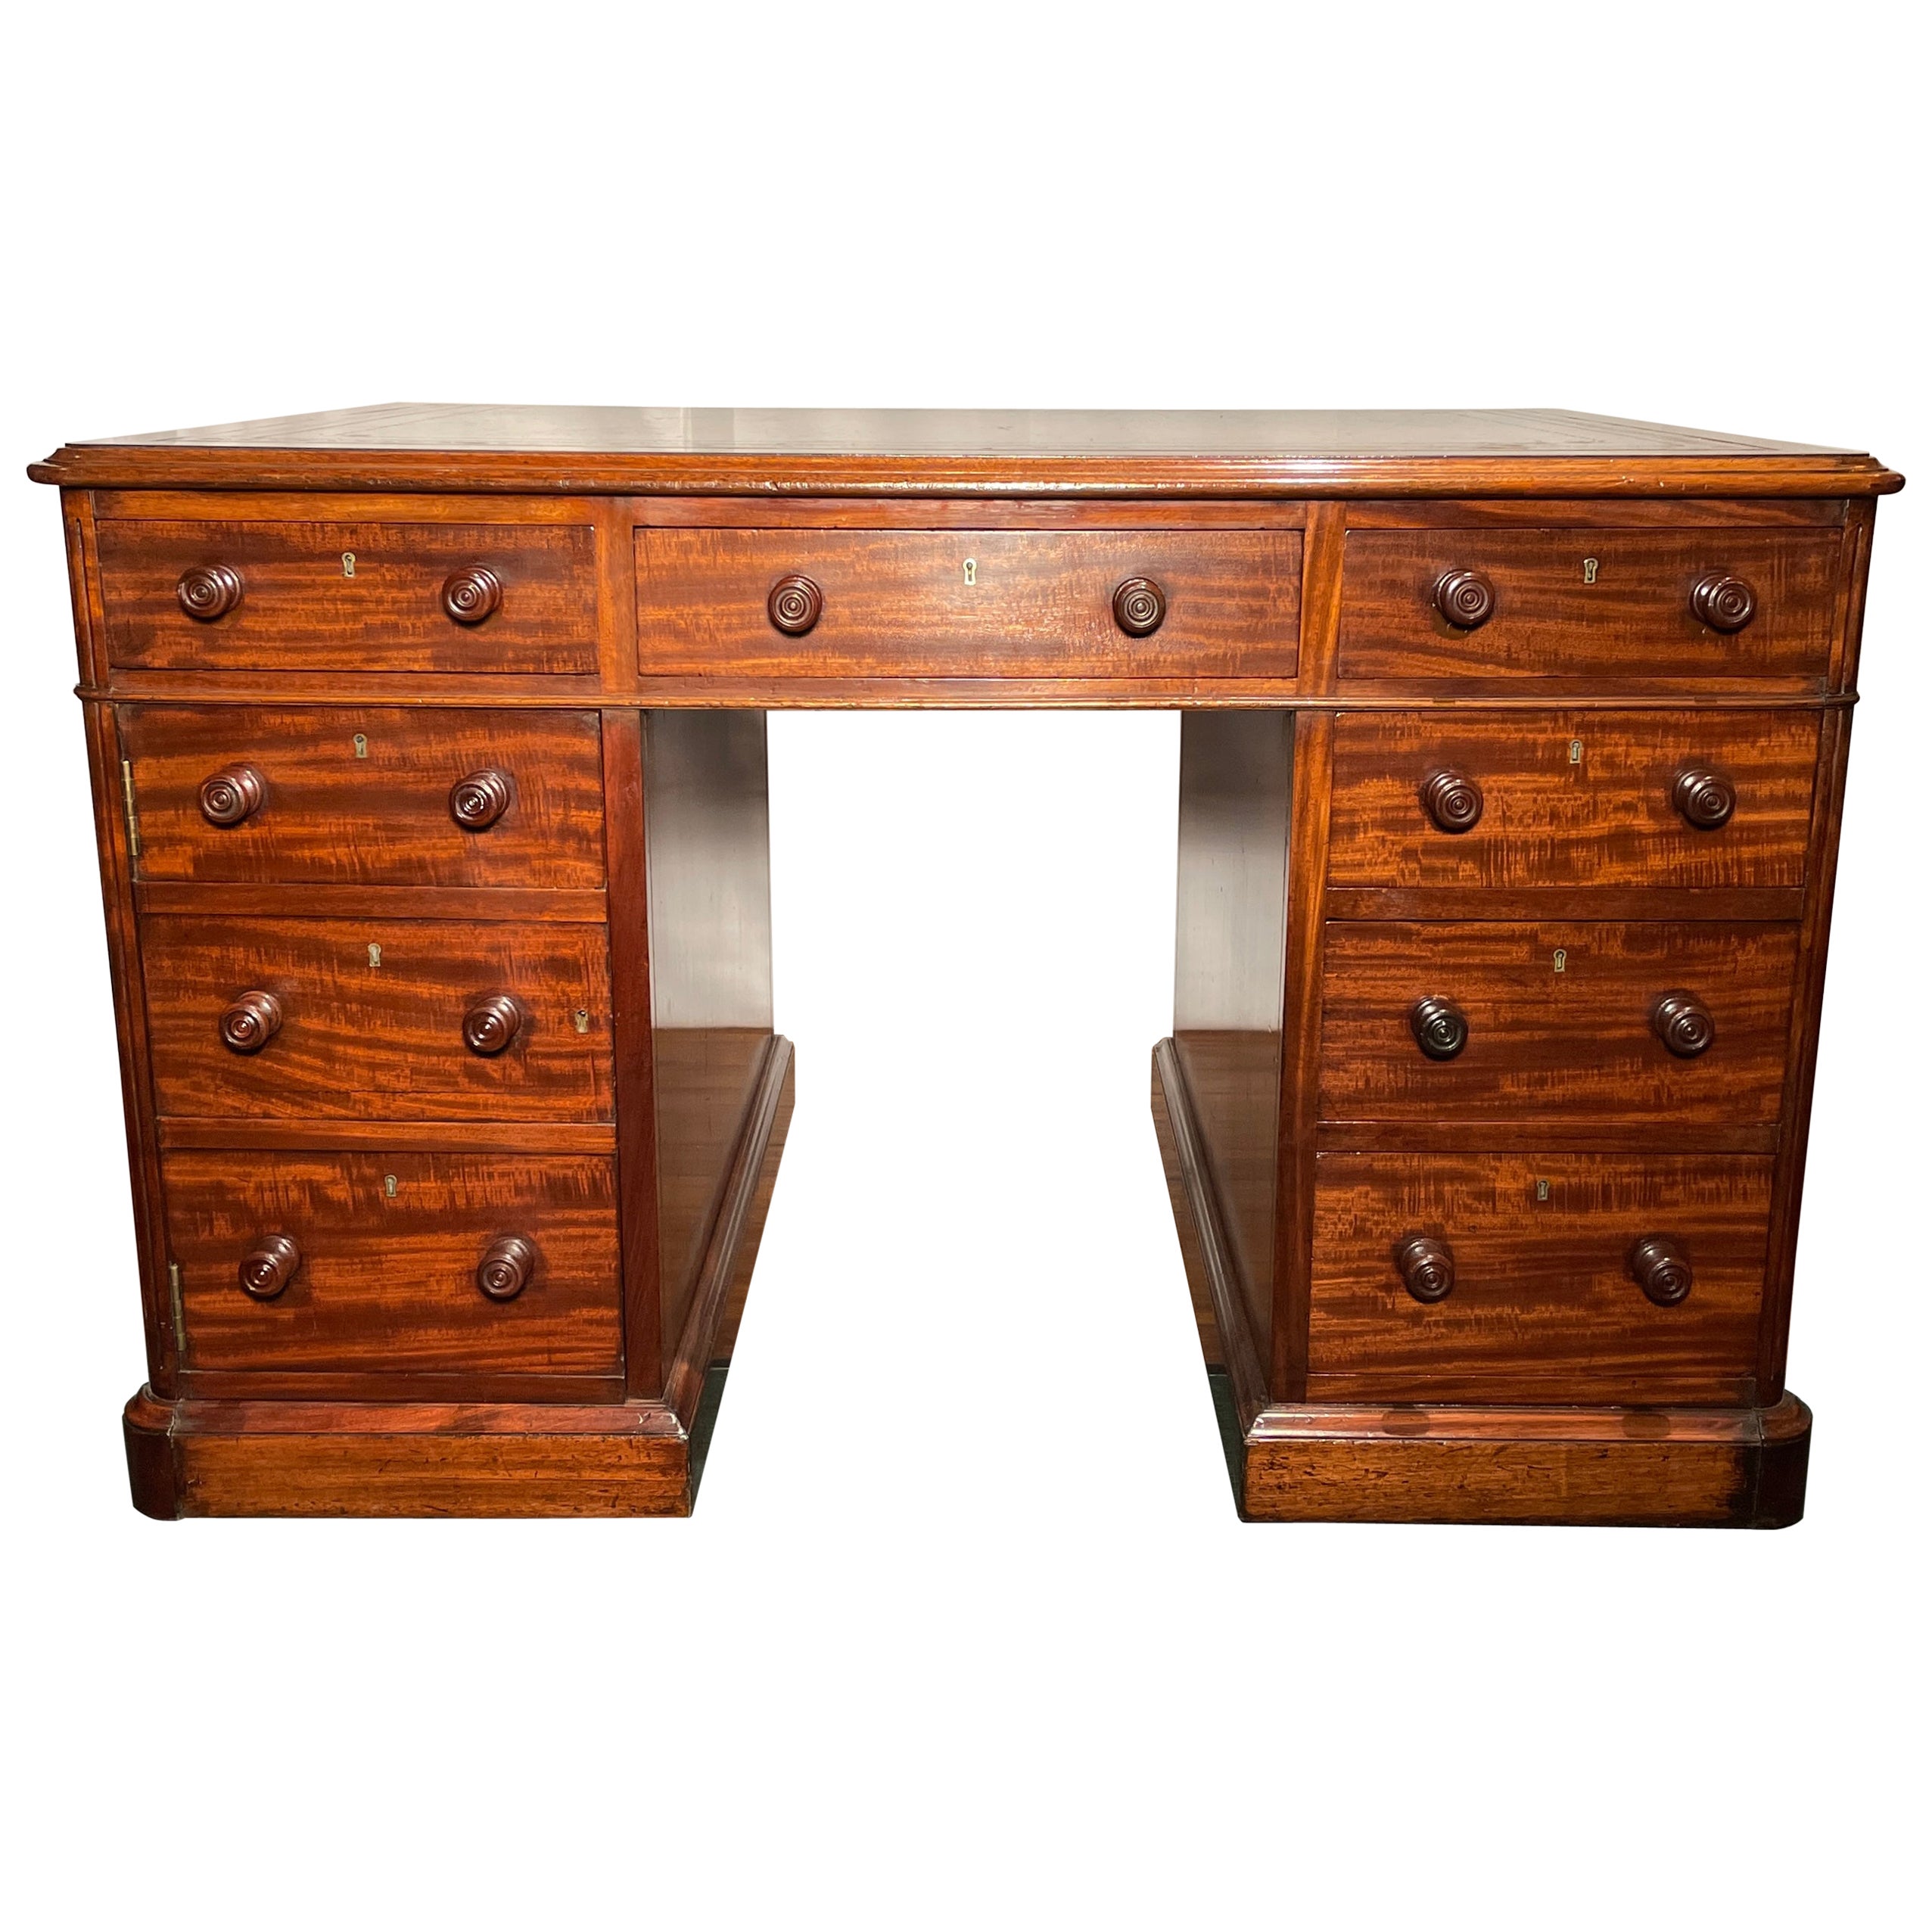 Antique English Leather-Top Mahogany Partner's Desk, Circa 1880 For Sale